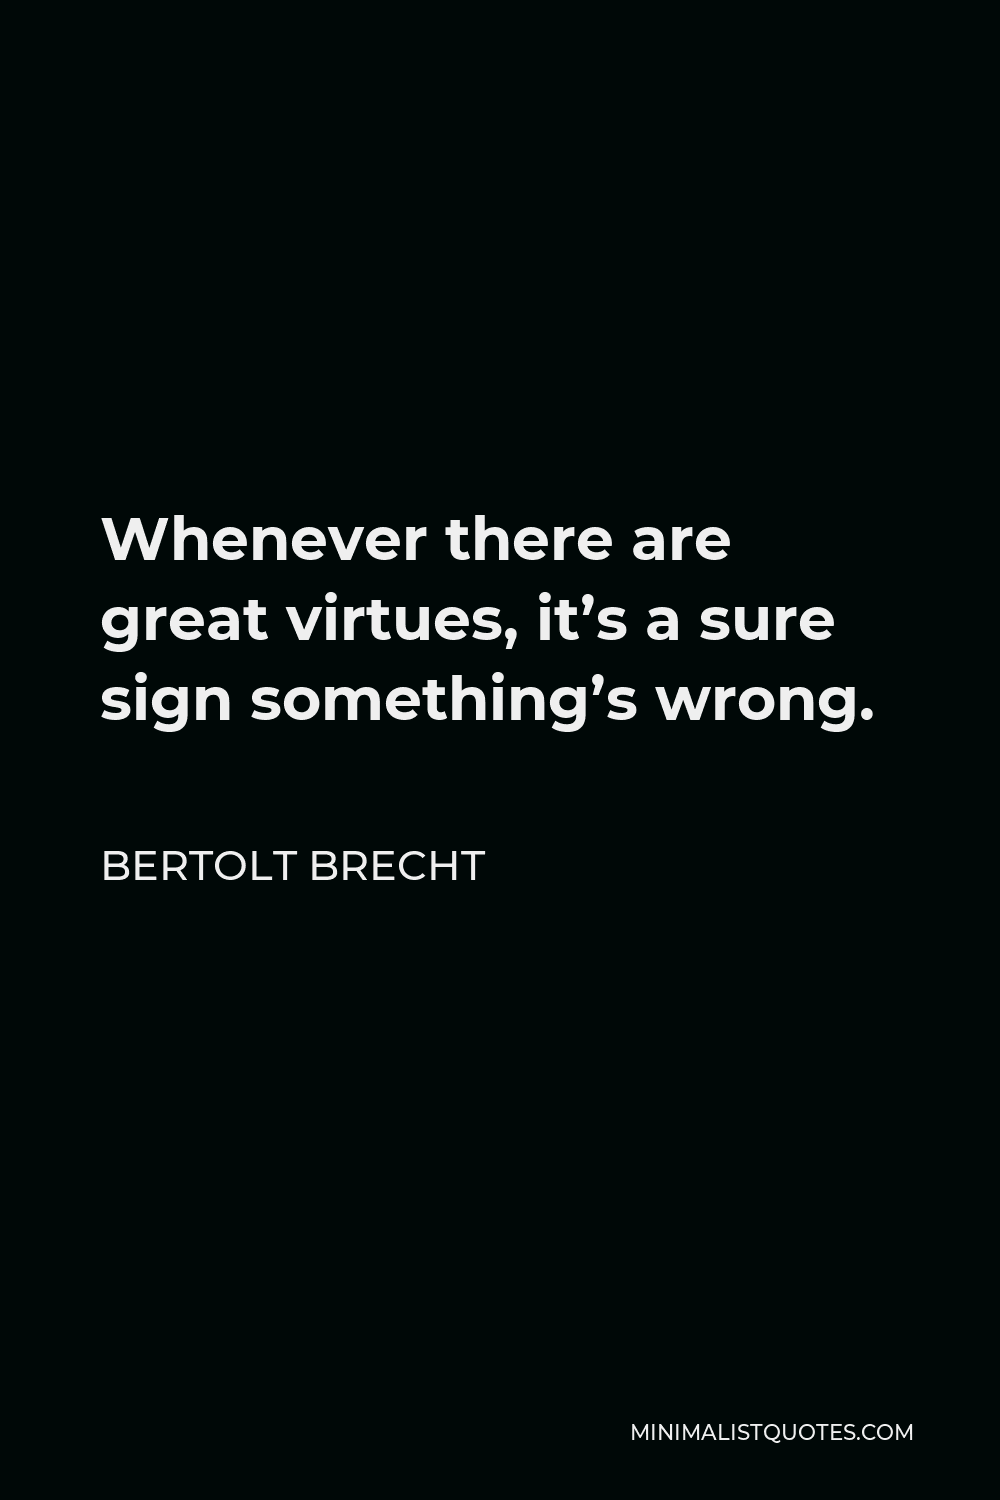 Bertolt Brecht Quote - Whenever there are great virtues, it’s a sure sign something’s wrong.